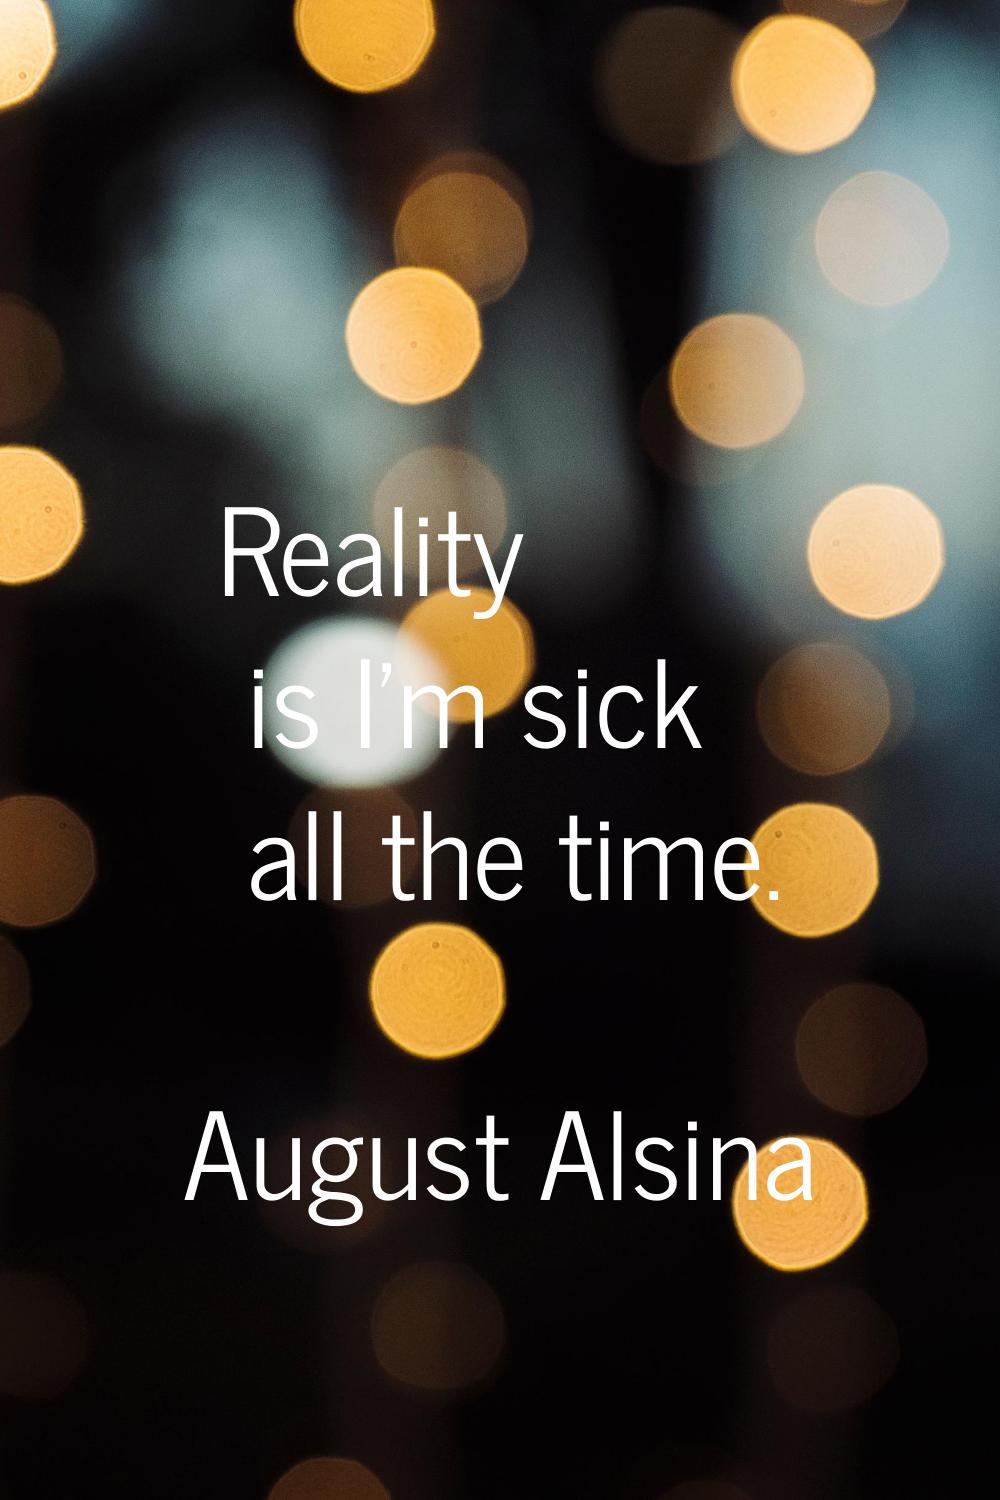 Reality is I'm sick all the time.